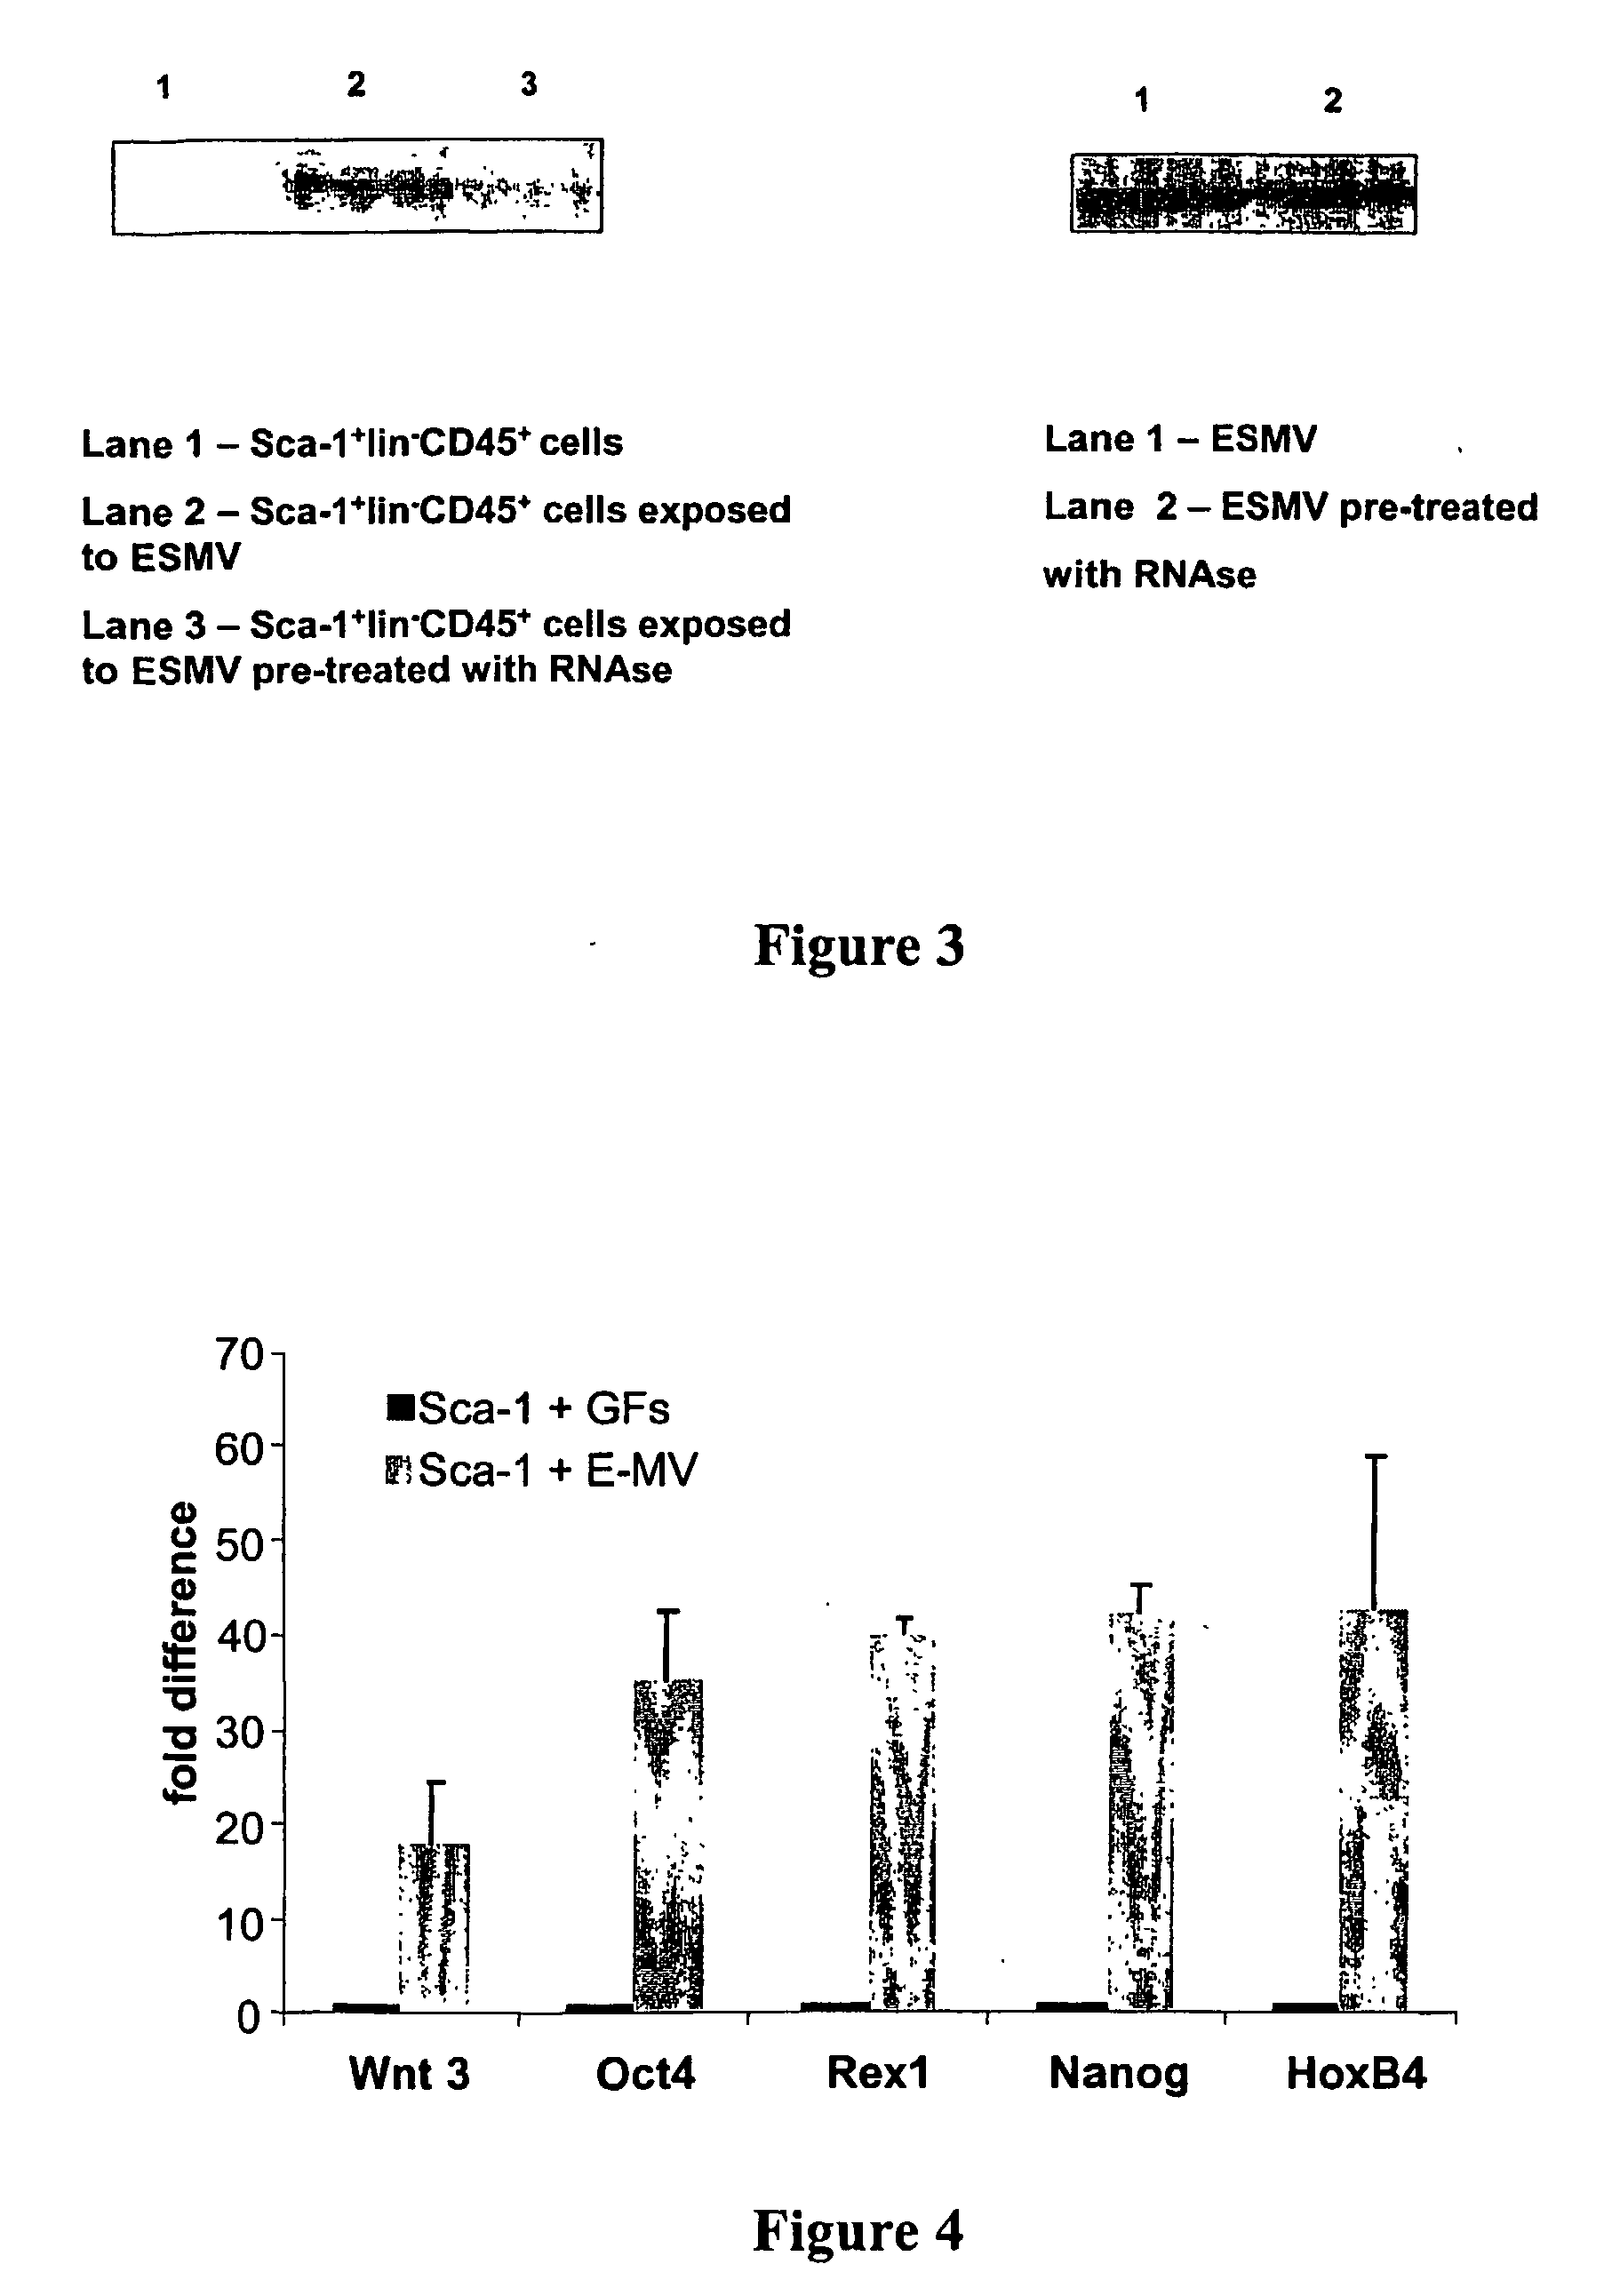 Rna - Containing Microvesicles and Methods Therefor